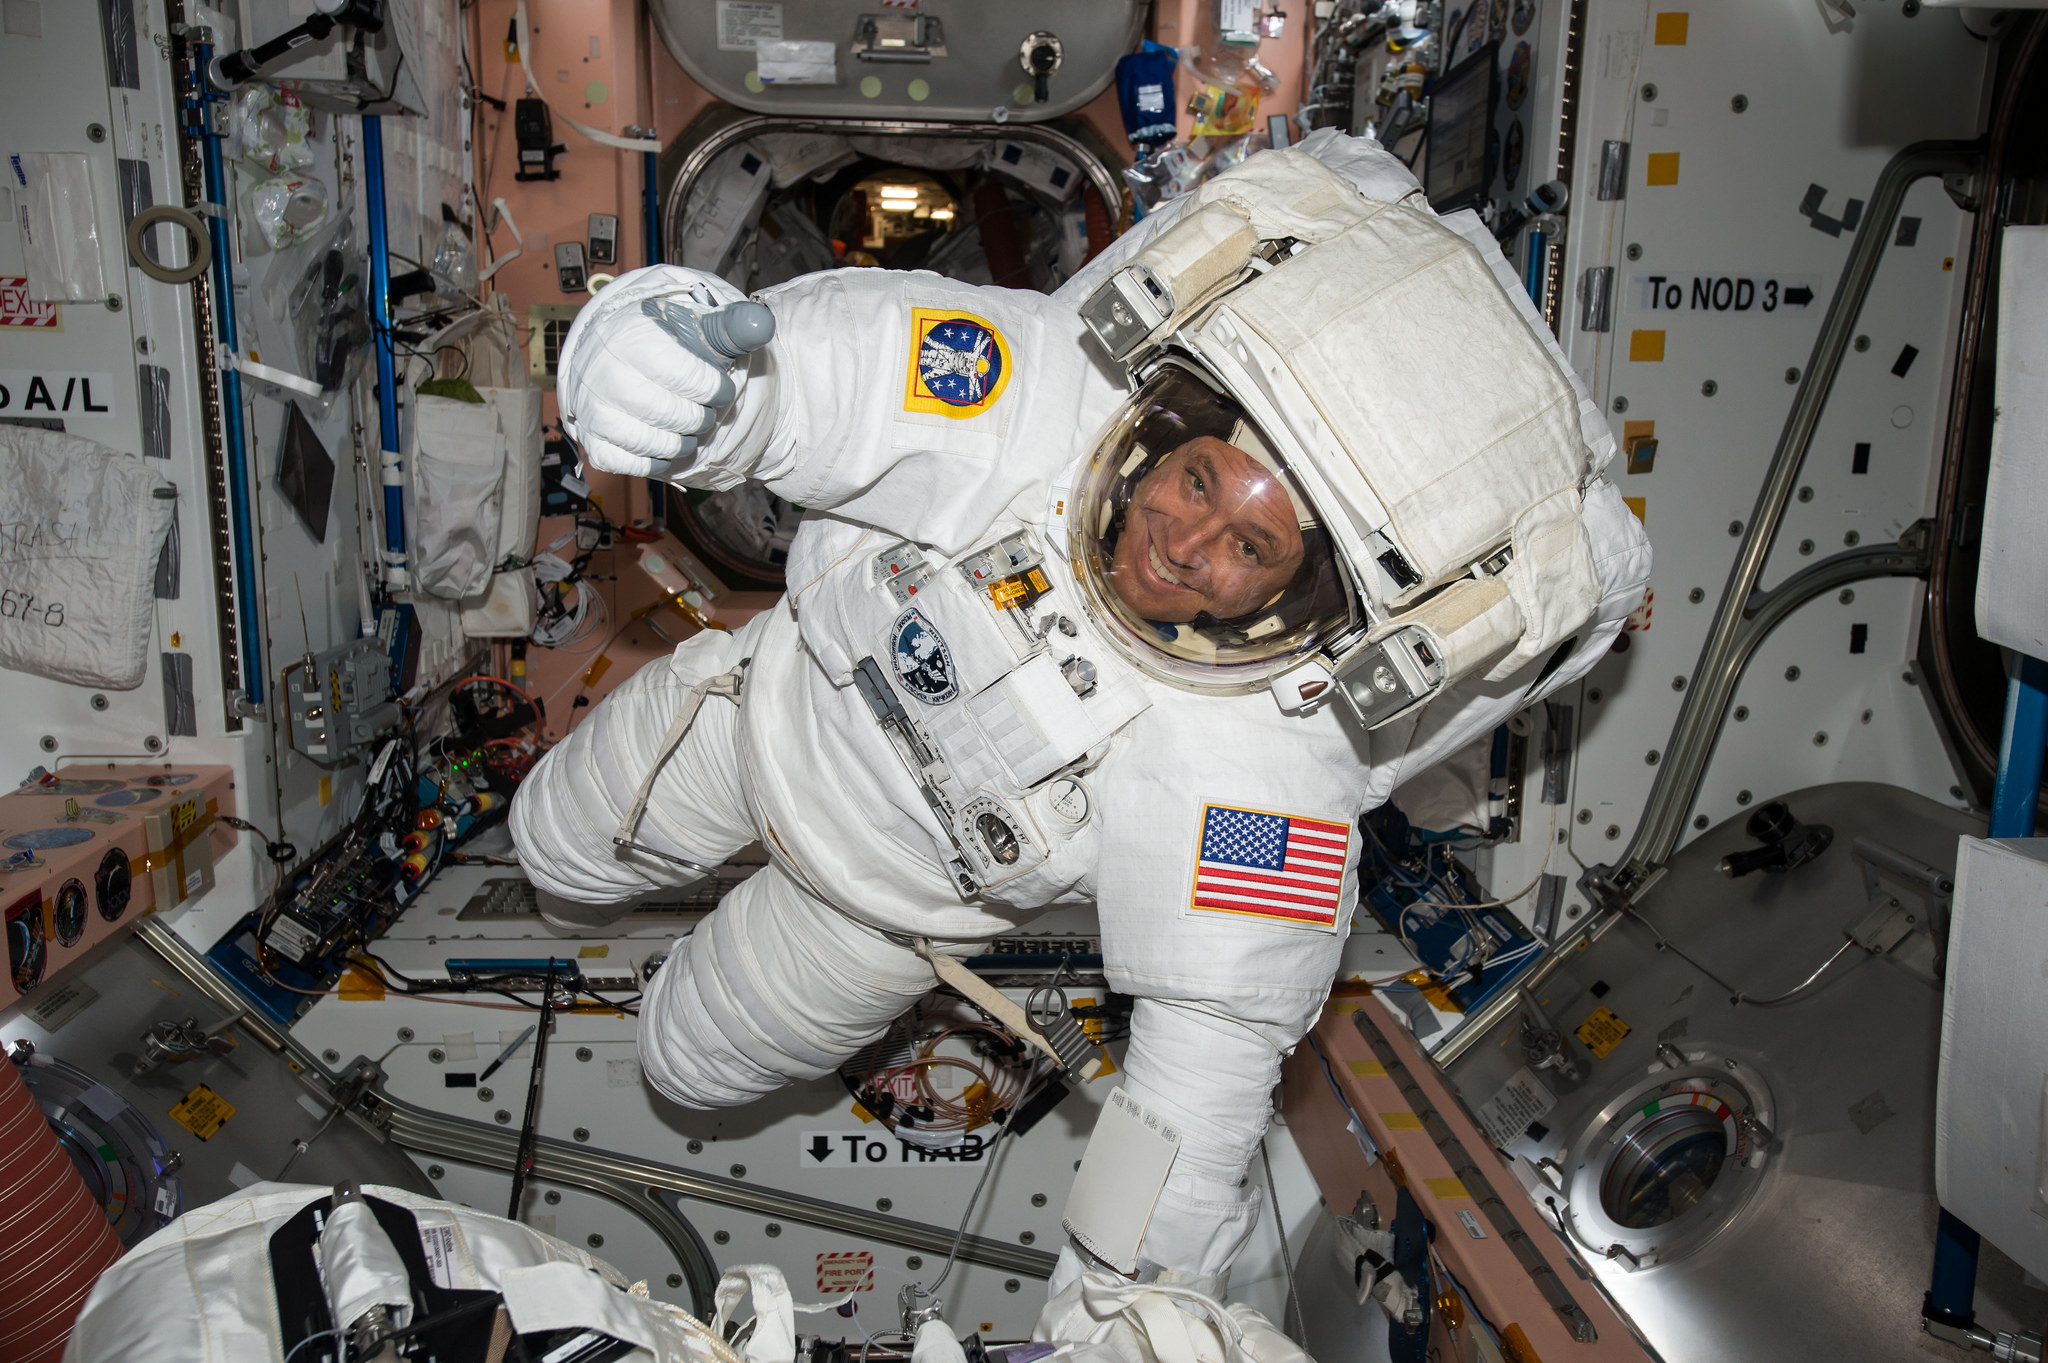 NASA astronaut Jack Fischer gives a thumbs up sign while wearing an Extravehicular Mobility Unit (EMU) spacesuit before a spacewalk May 12, 2017 on the International Space Station.  Fischer and NASA astronaut Peggy Whitson will perform a repair spacewalk on Tuesday, May 23.